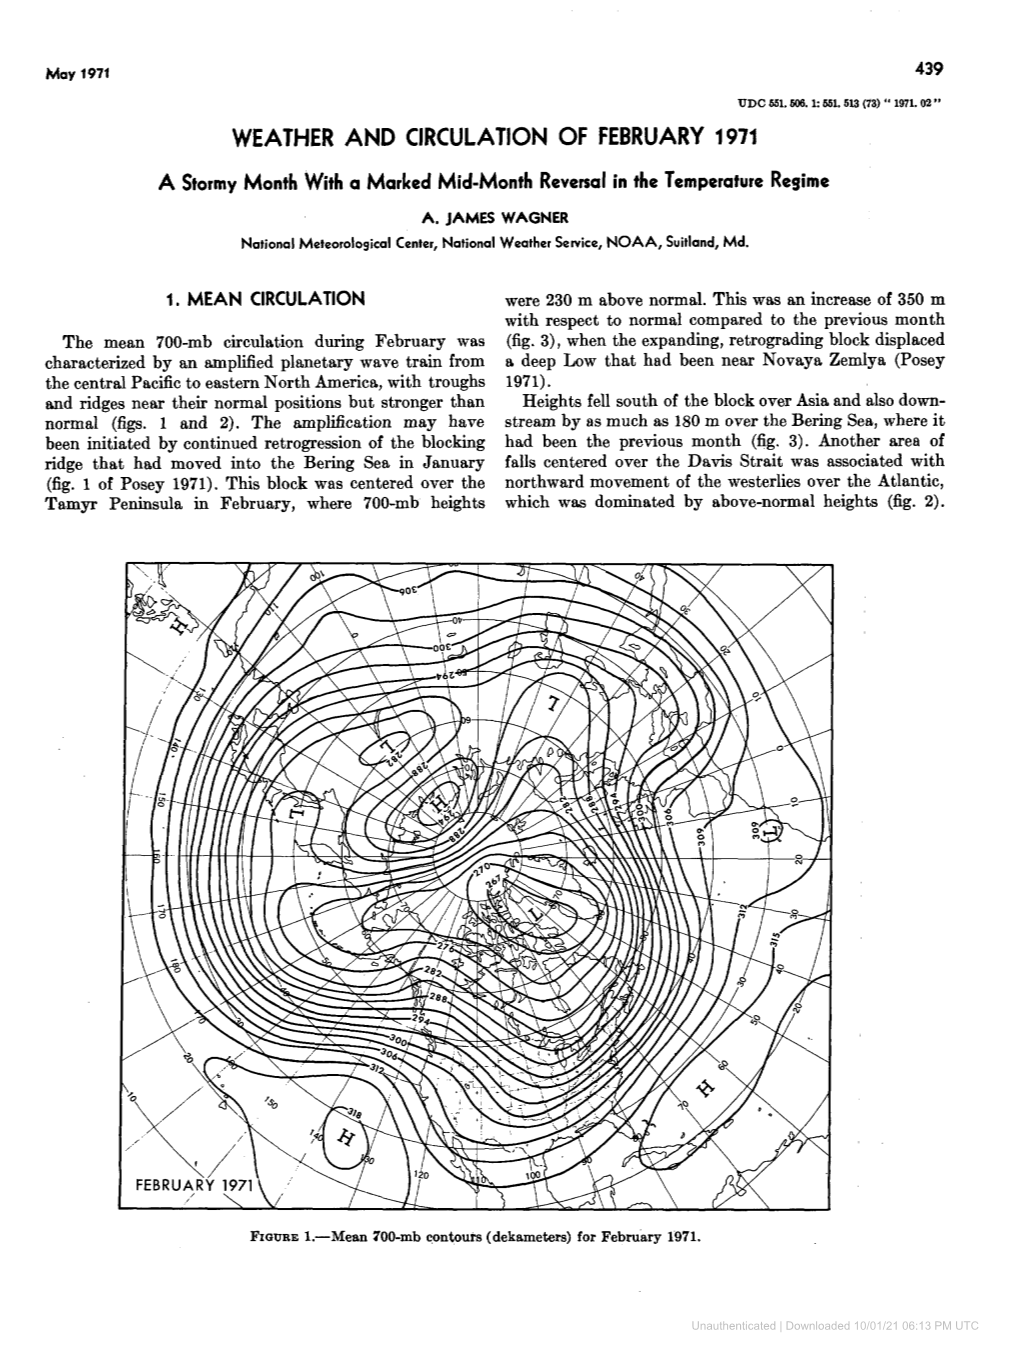 Weather and Circulation of February 1971